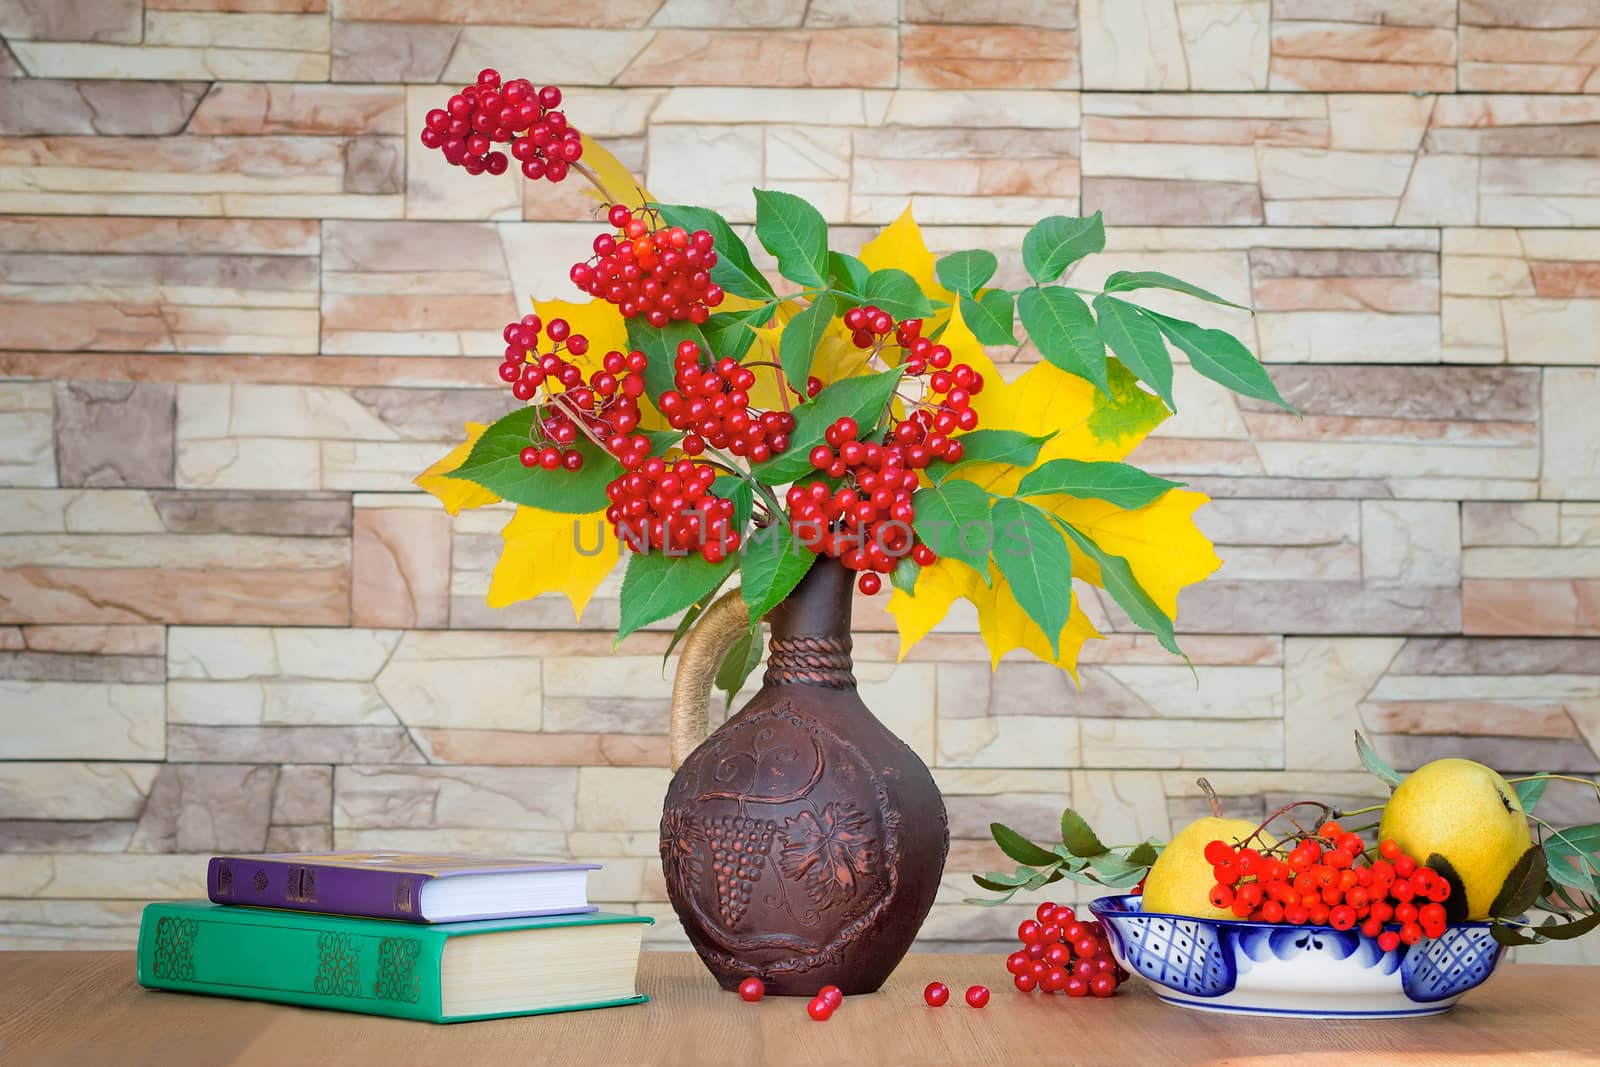 Autumn still life: berries and autumn leaves in a ceramic vase. by georgina198